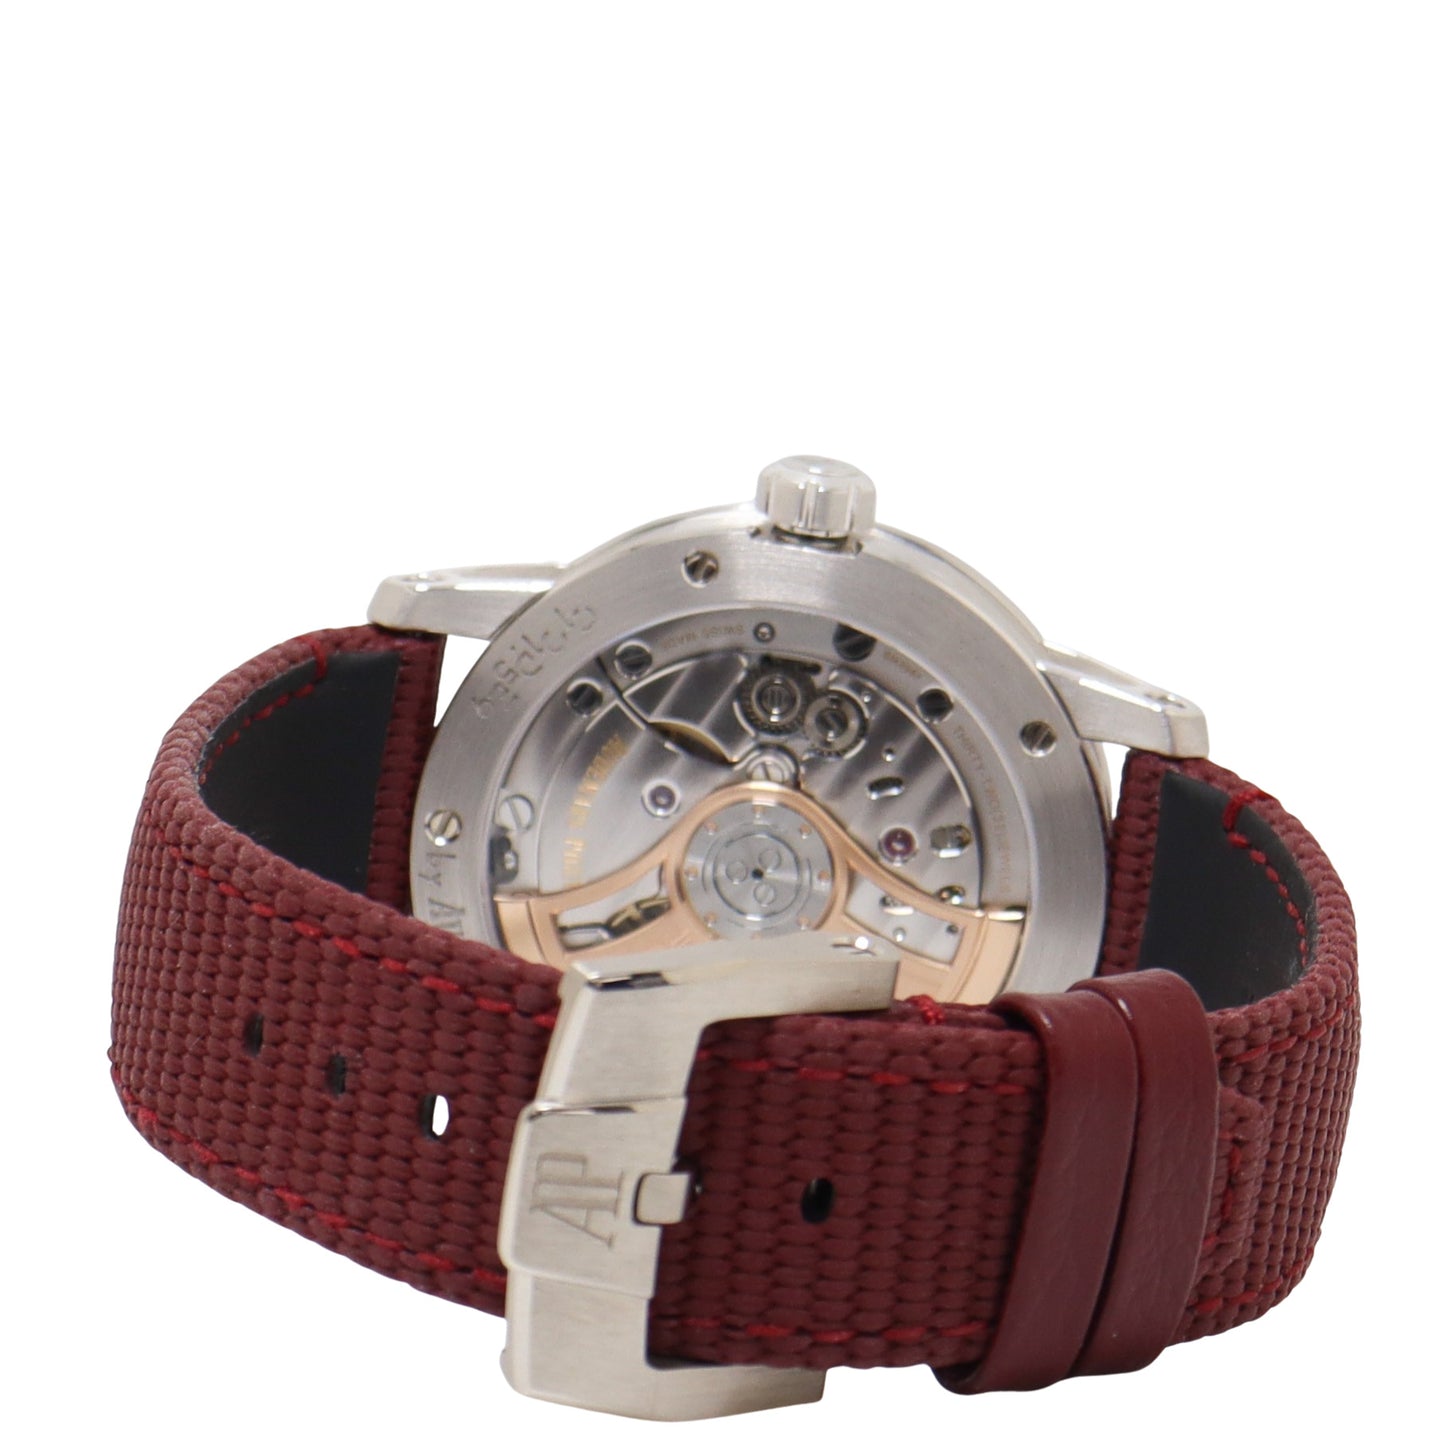 Audemars Piget Code 11.59 41mm White Gold Smoke Burgundy Dial Watch Reference# 15210BC.OO.A500KB.01 - Happy Jewelers Fine Jewelry Lifetime Warranty